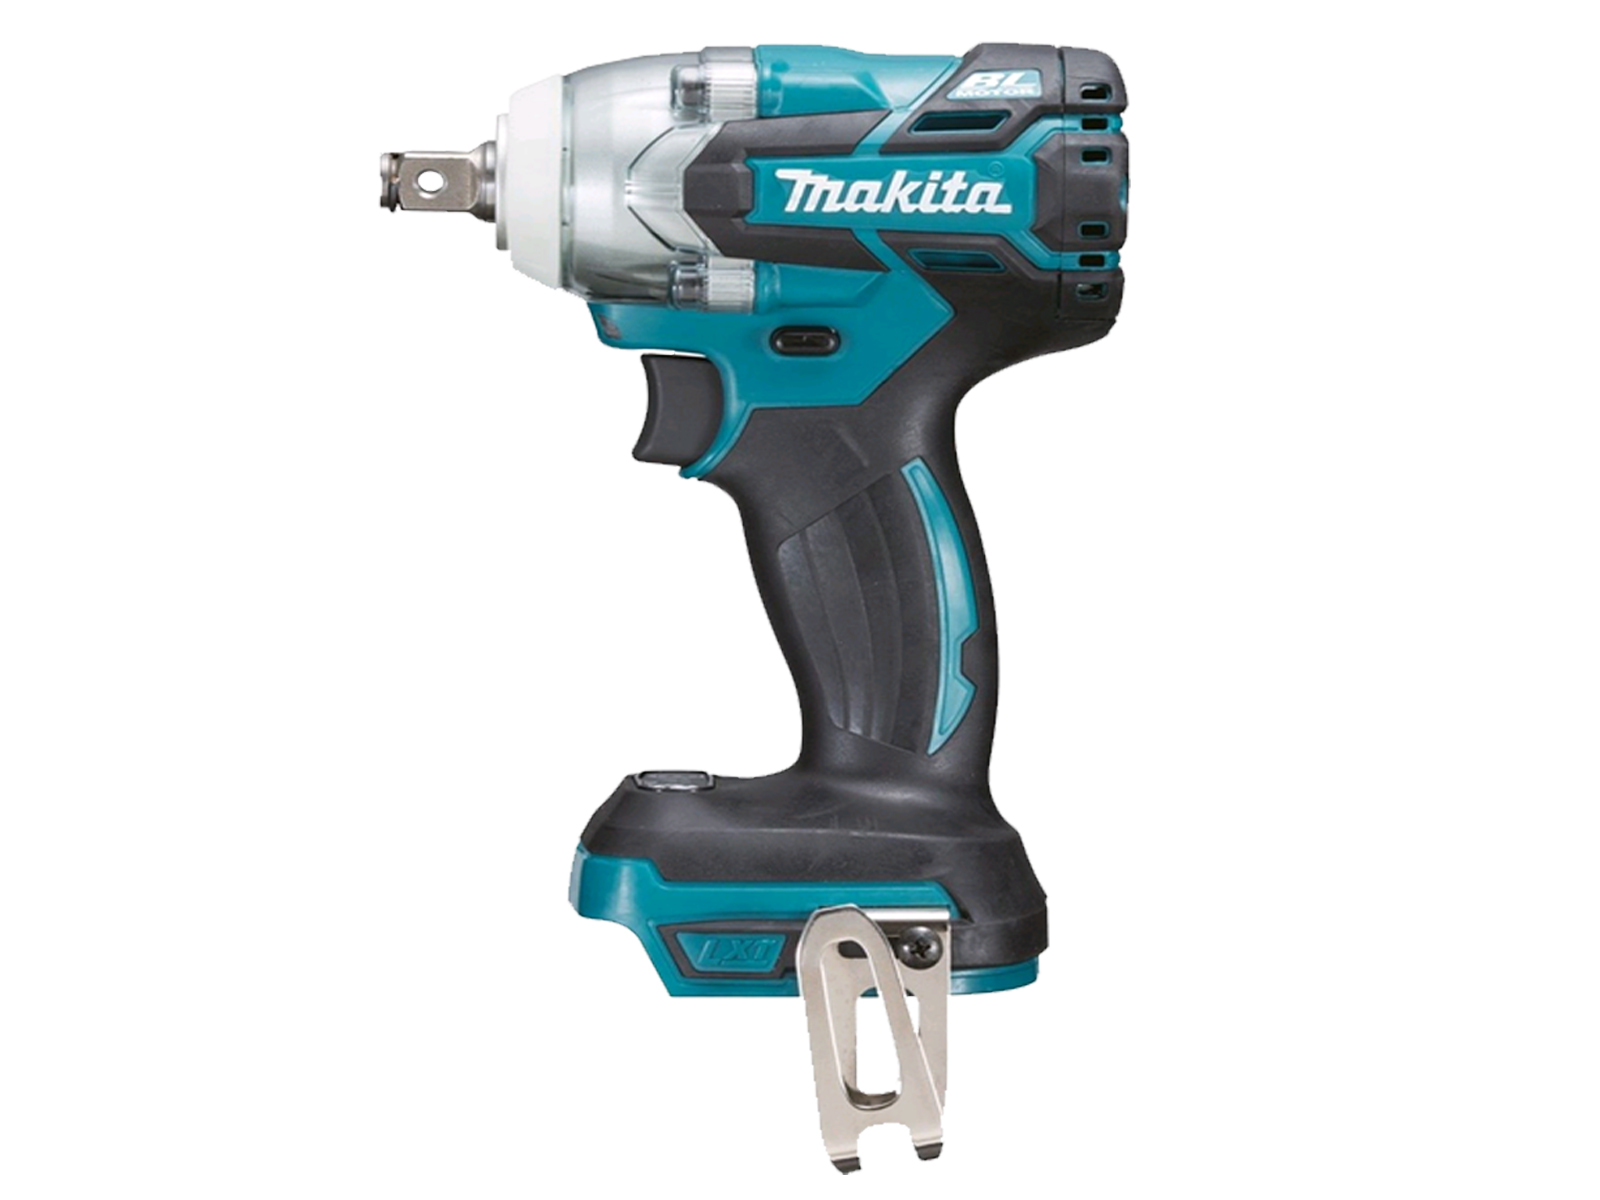 Makita 18V Brushless Impact Wrench LXT - DTW300 - Body Only